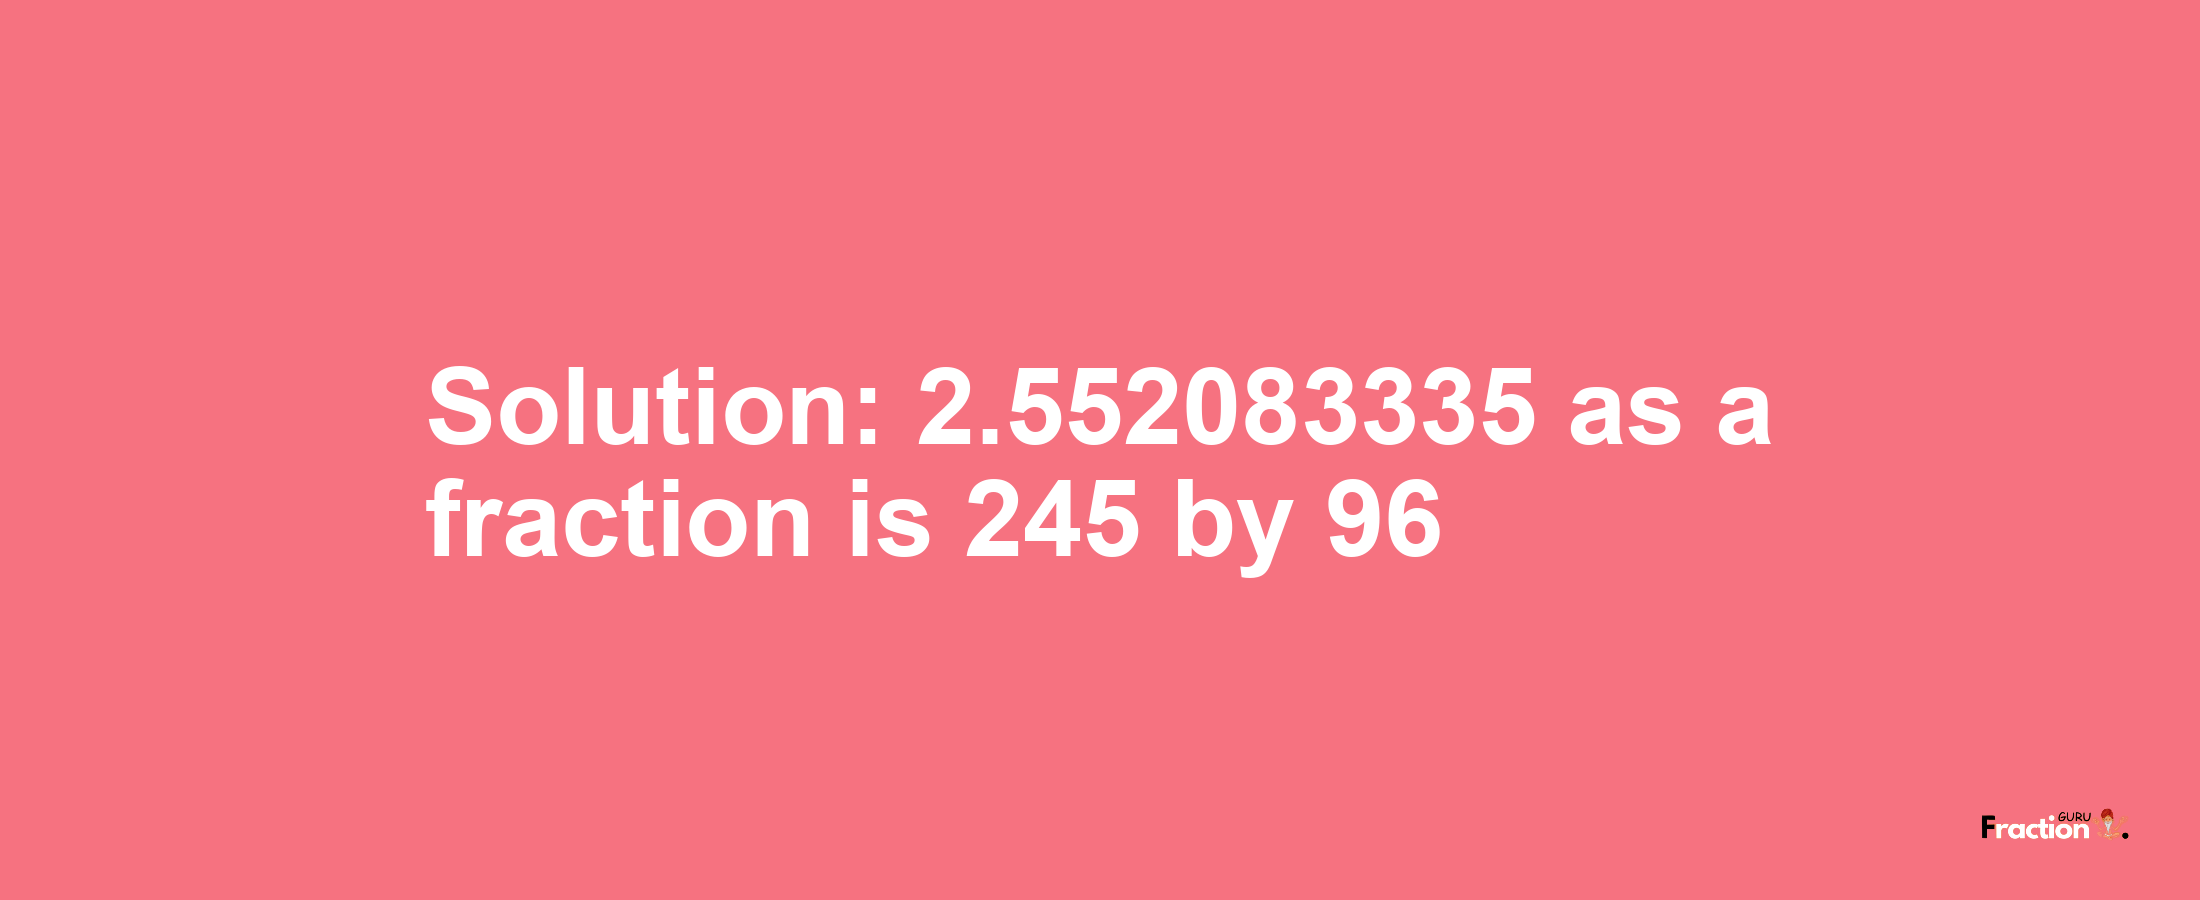 Solution:2.552083335 as a fraction is 245/96